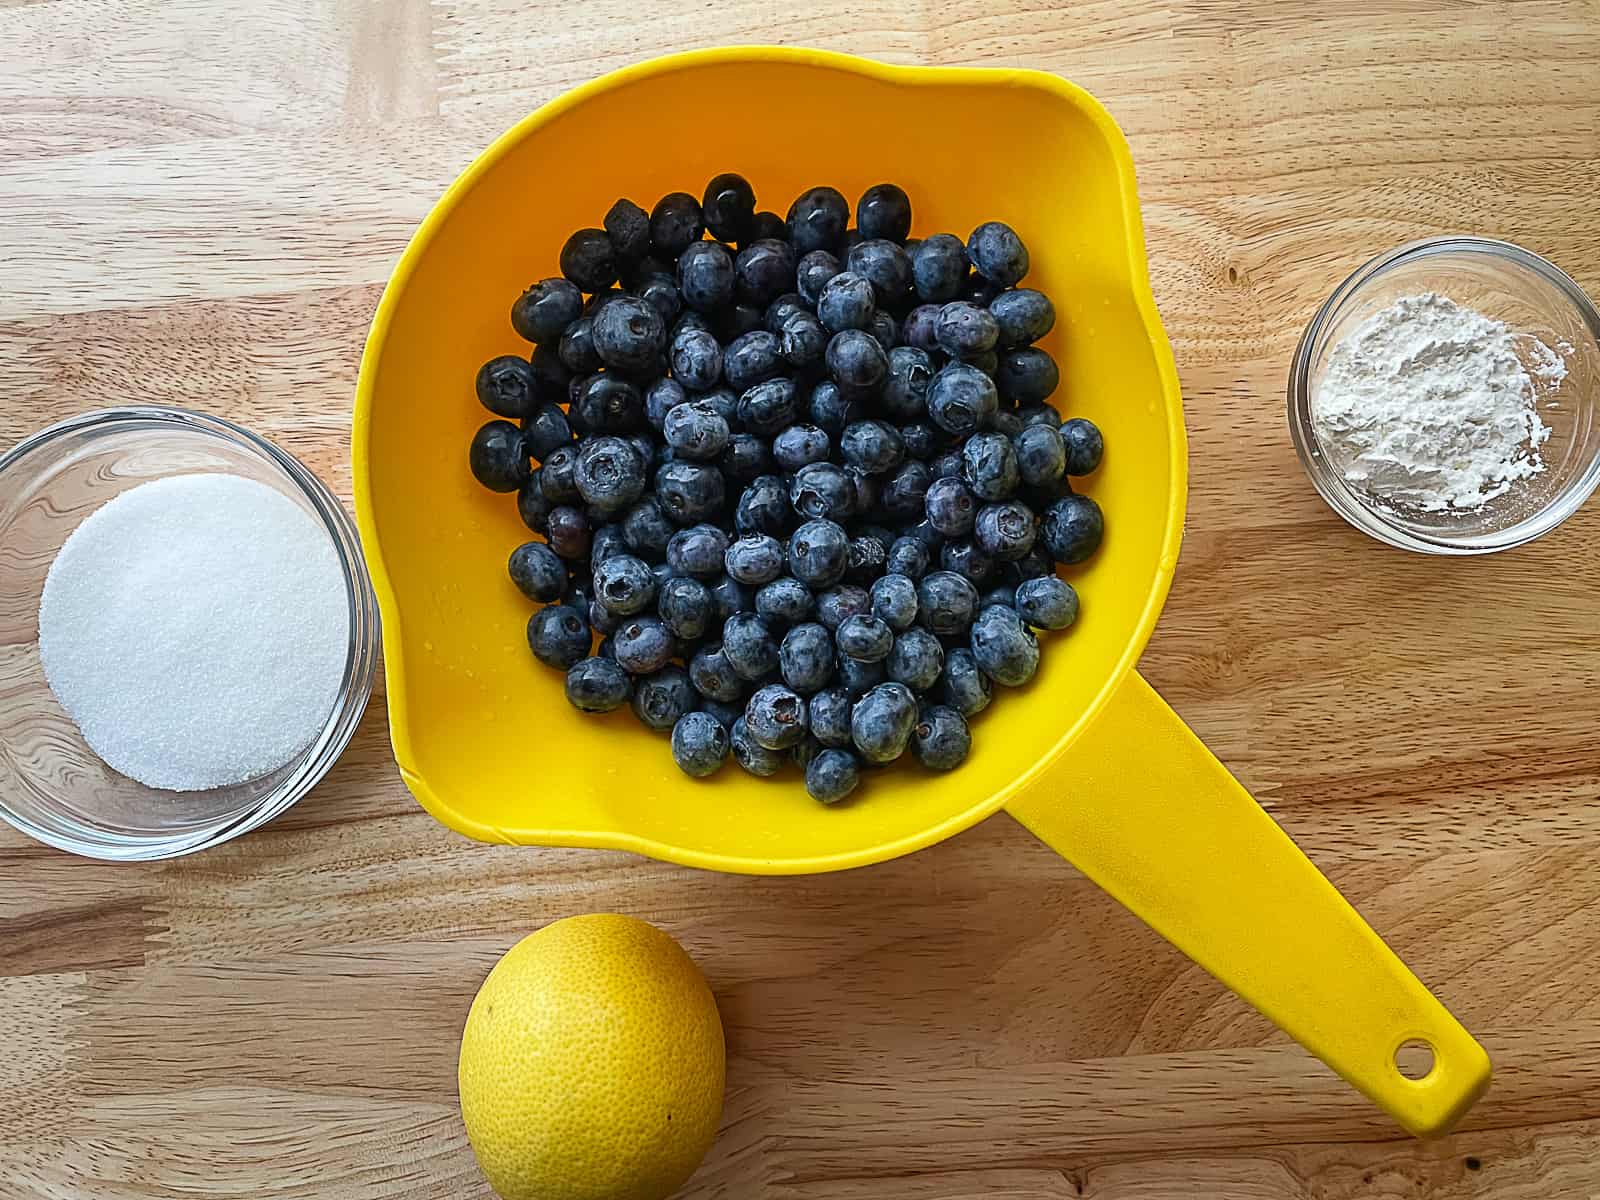 Ingredients for blueberry galette filling. Sugar, blueberries, cornstarch, and lemon.